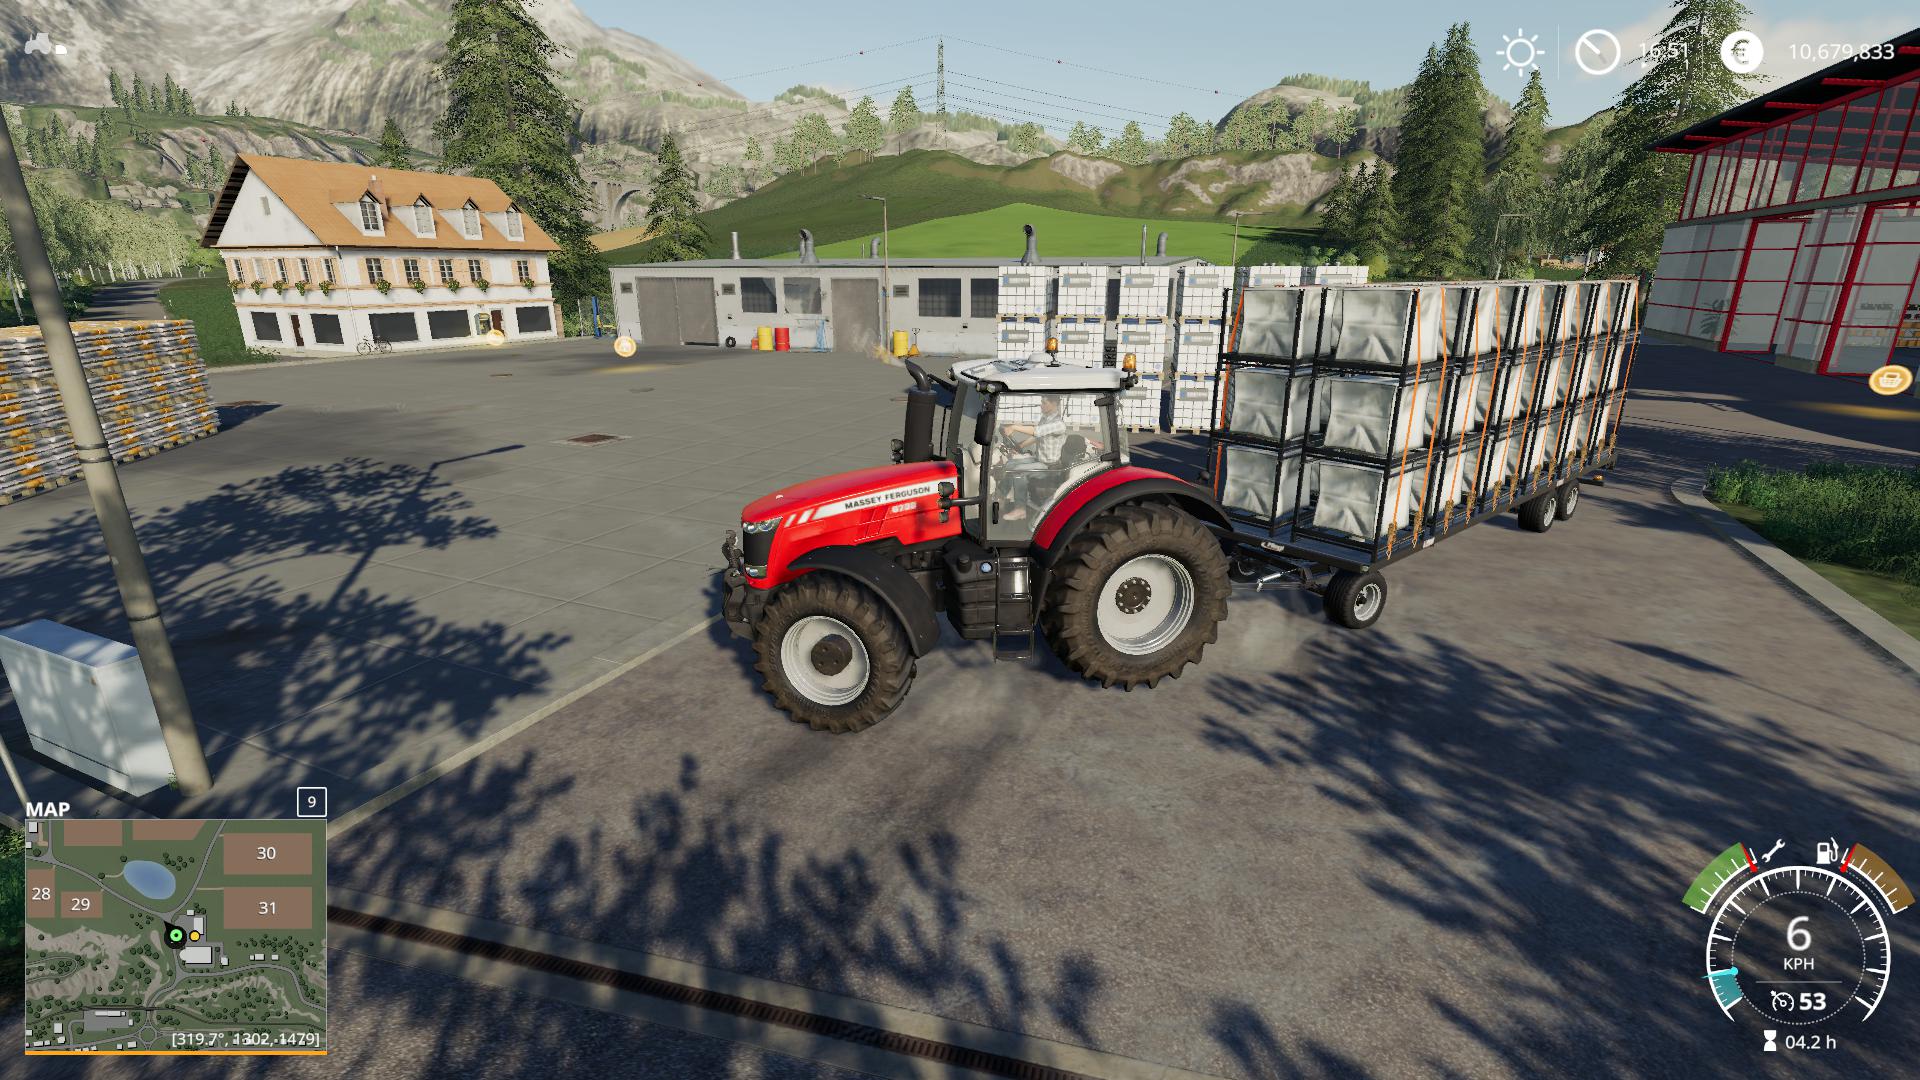 Fs19 Autoload Pack With 3 Tiers Of Pallet Loading V10 Farming Simulator 19 Modsclub 7045